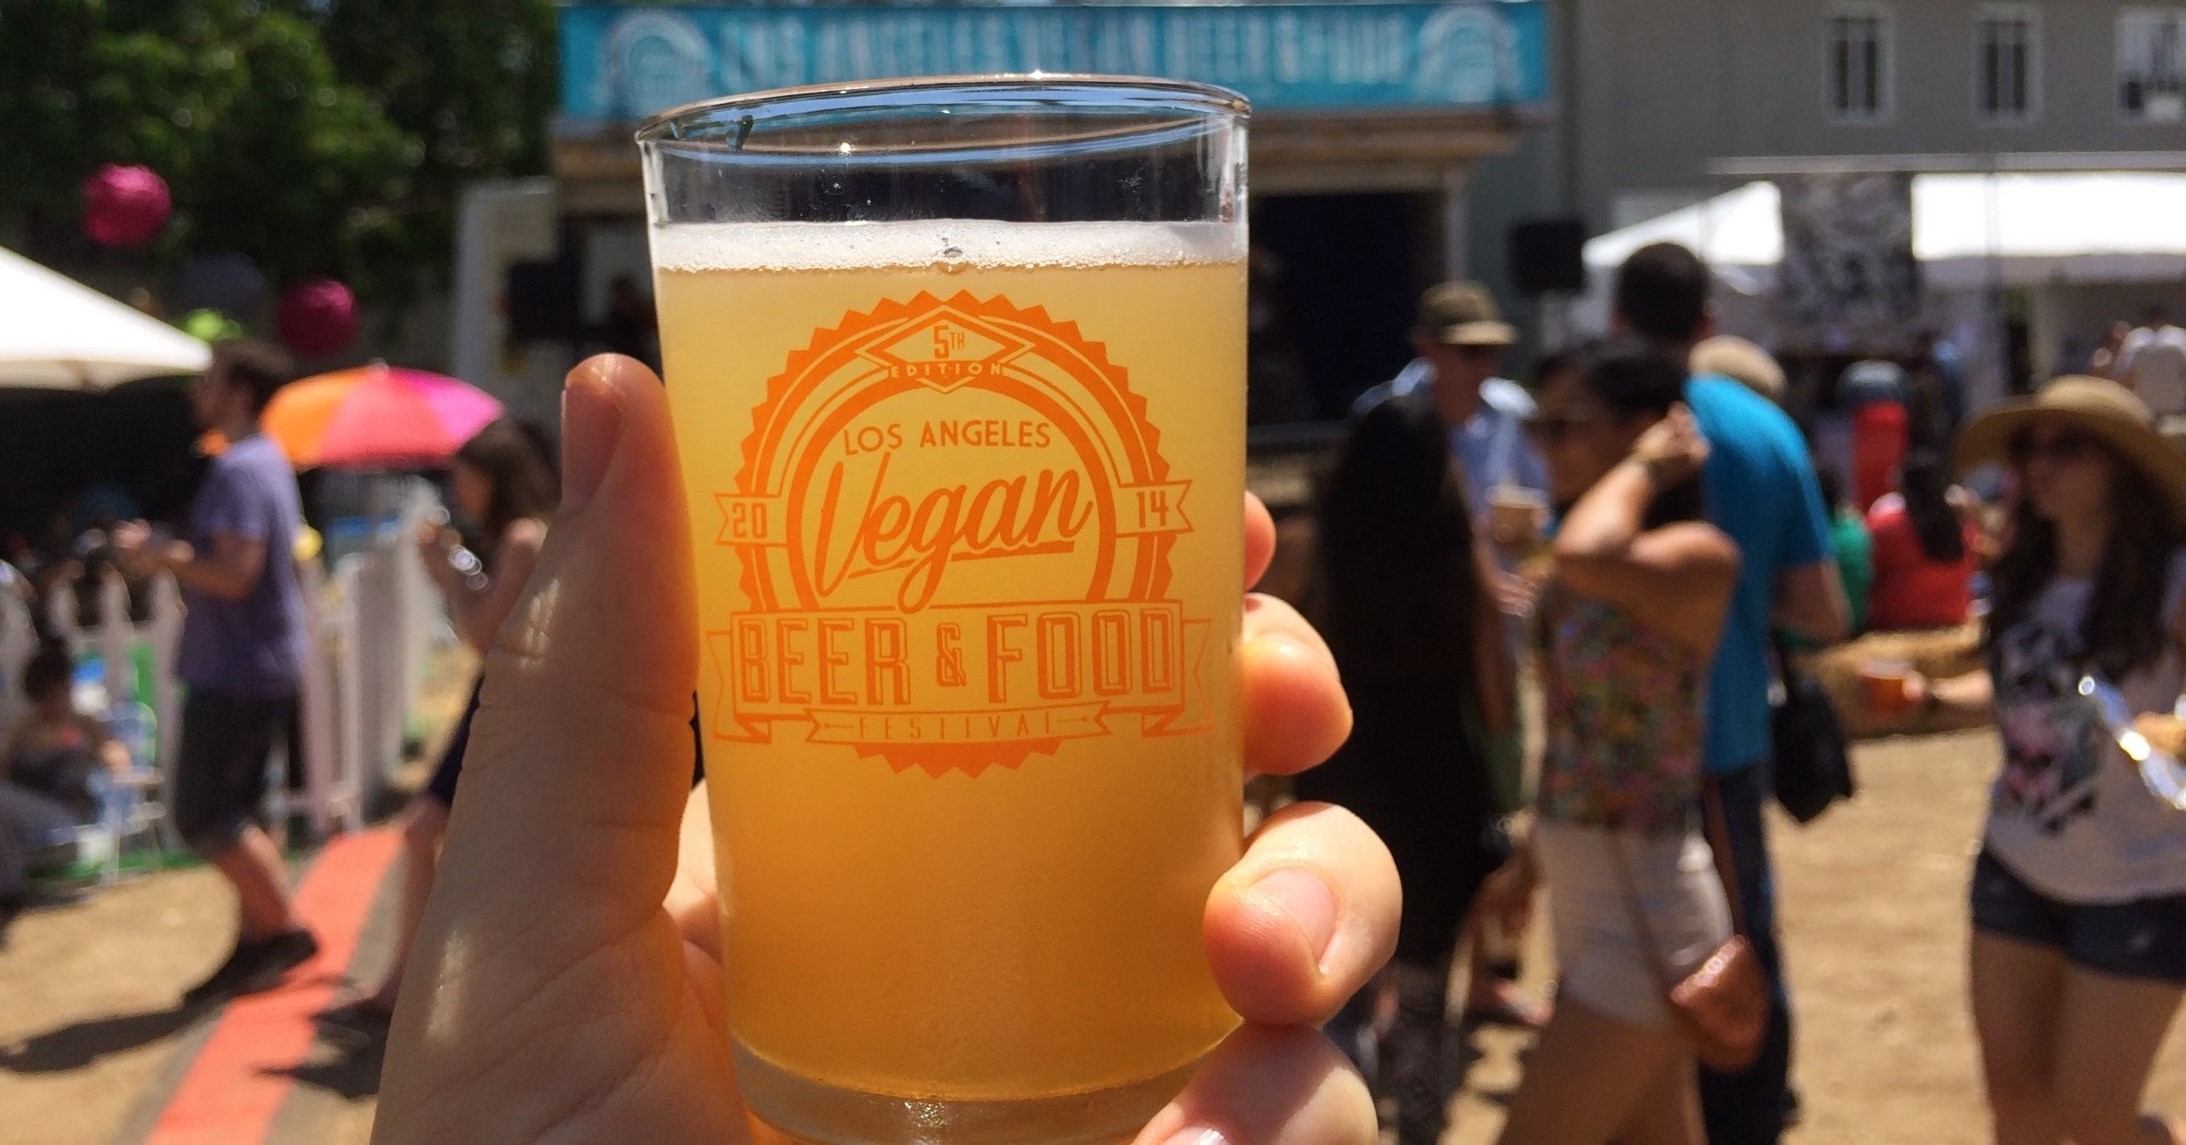 19-facts-about-vegan-beer-fest